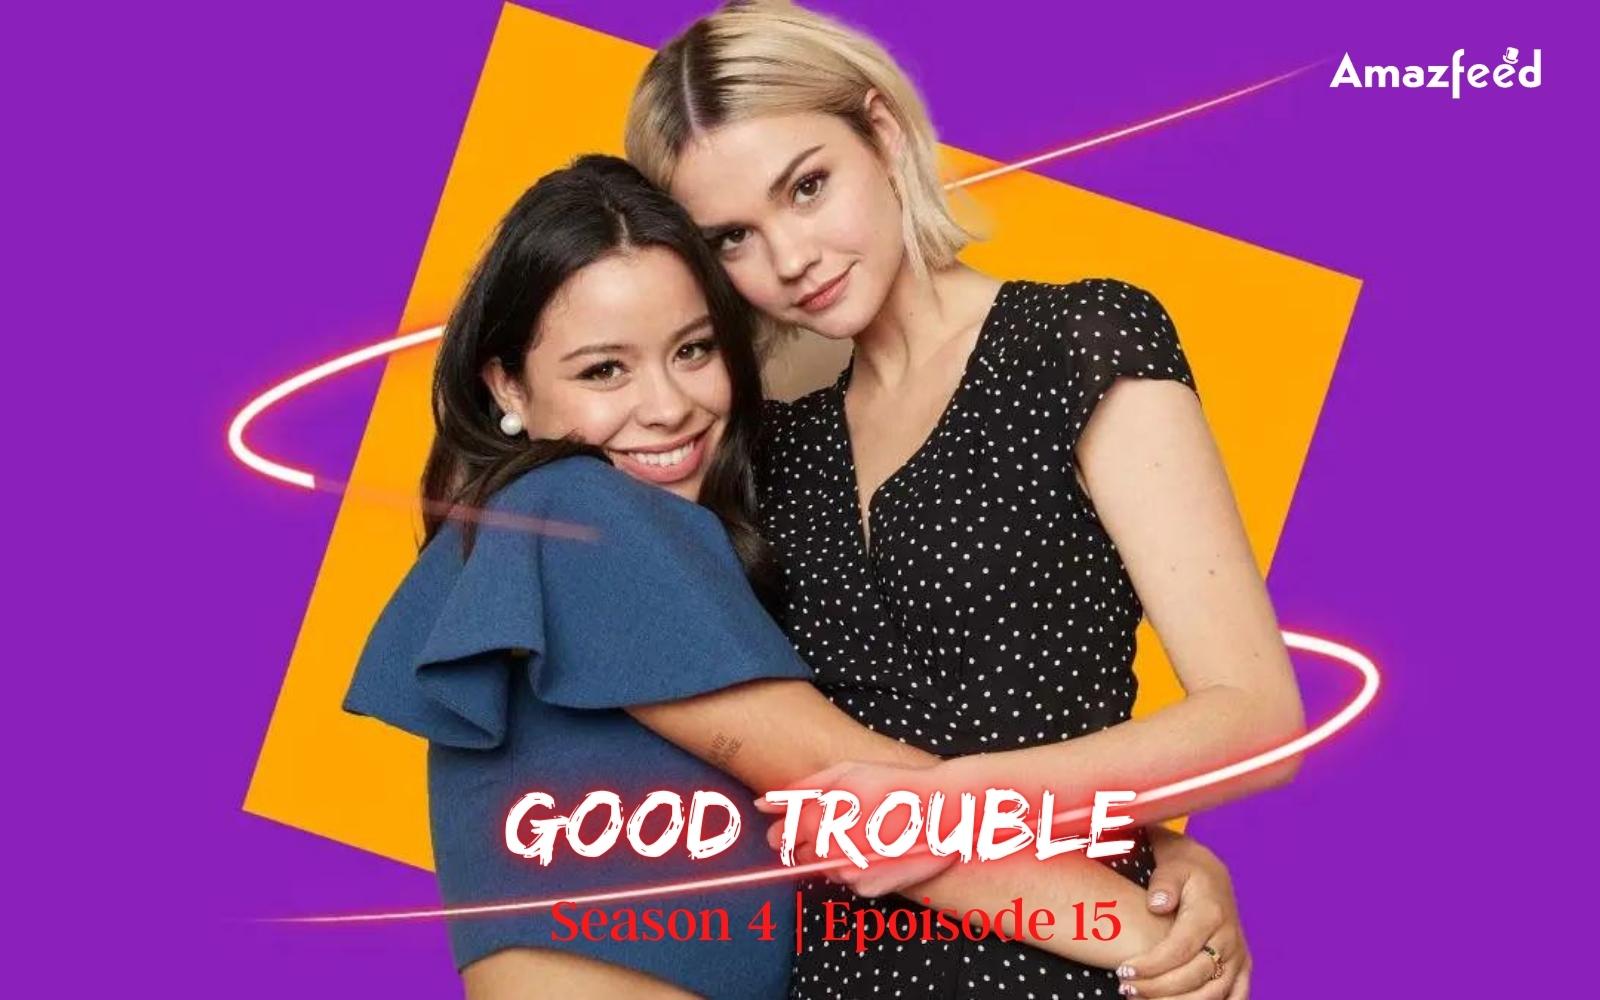 Good Trouble Season 4 Episode 15: Where to Watch, Countdown, Release Date, Spoiler and Cast